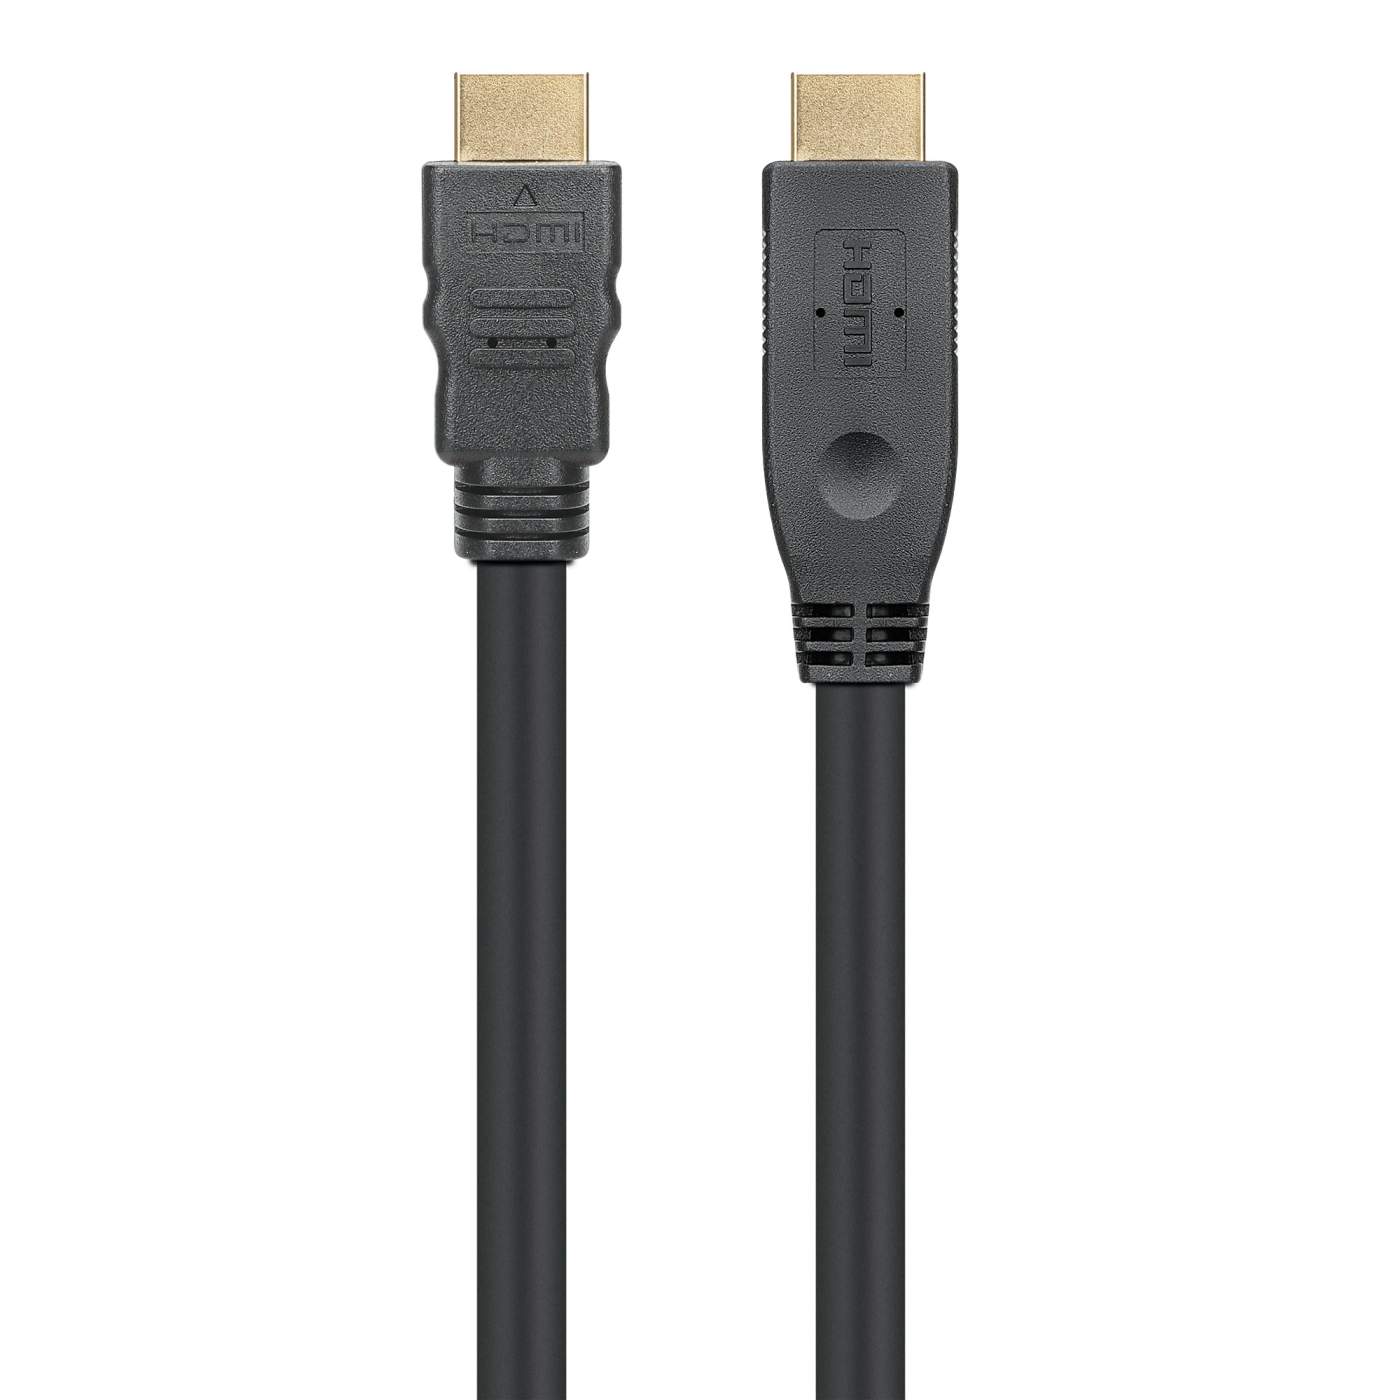 In-wall CL3 High Speed HDMI Cable with Ethernet Image 5